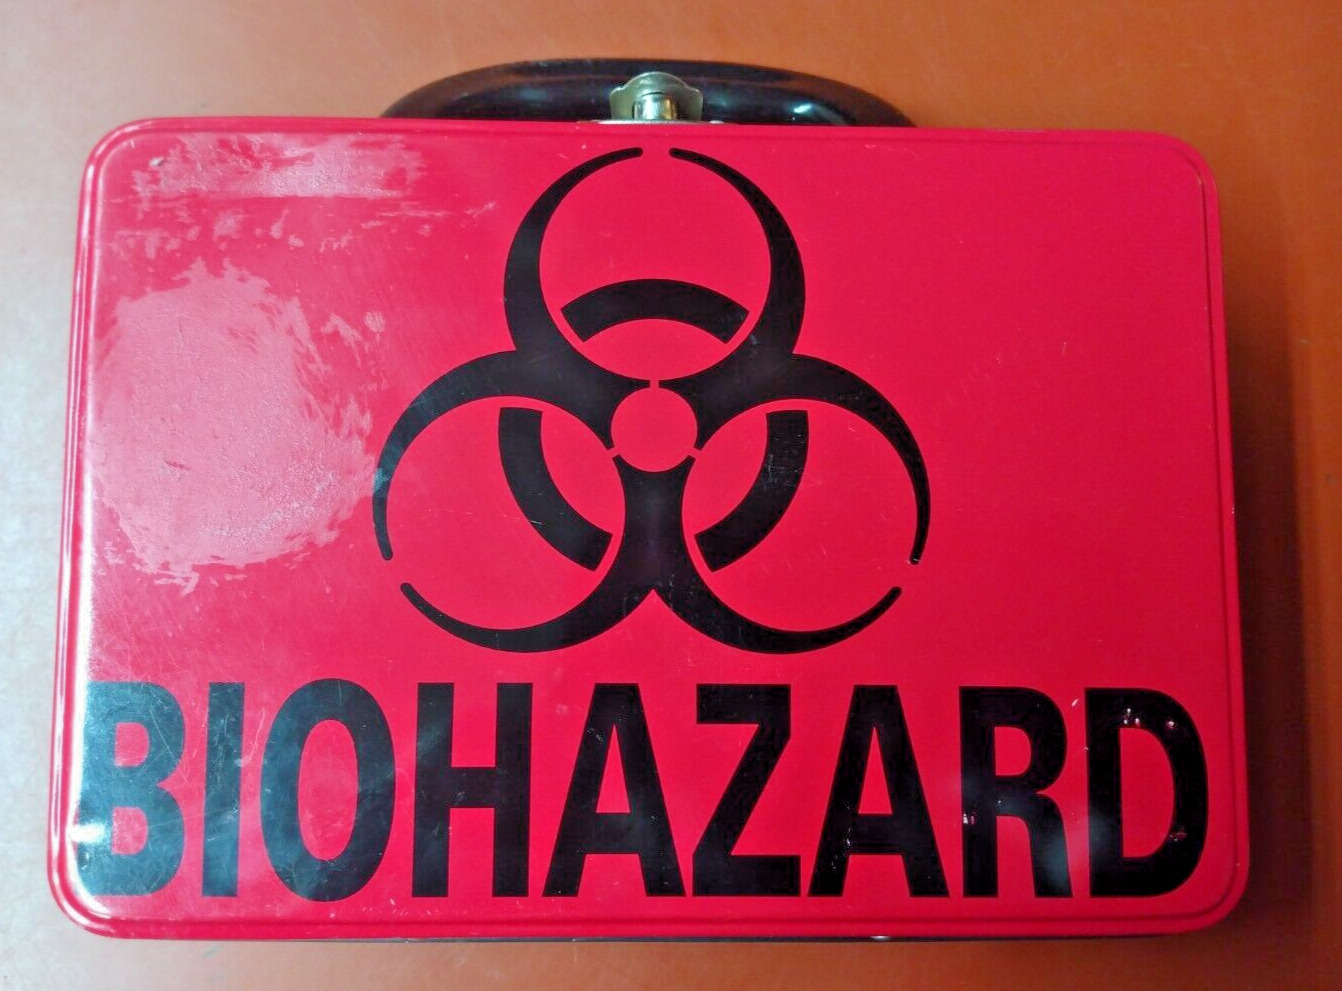 Radioactive Biohazard Tin Lunch Box In Poor Condition 5 x 7 Inches 1999